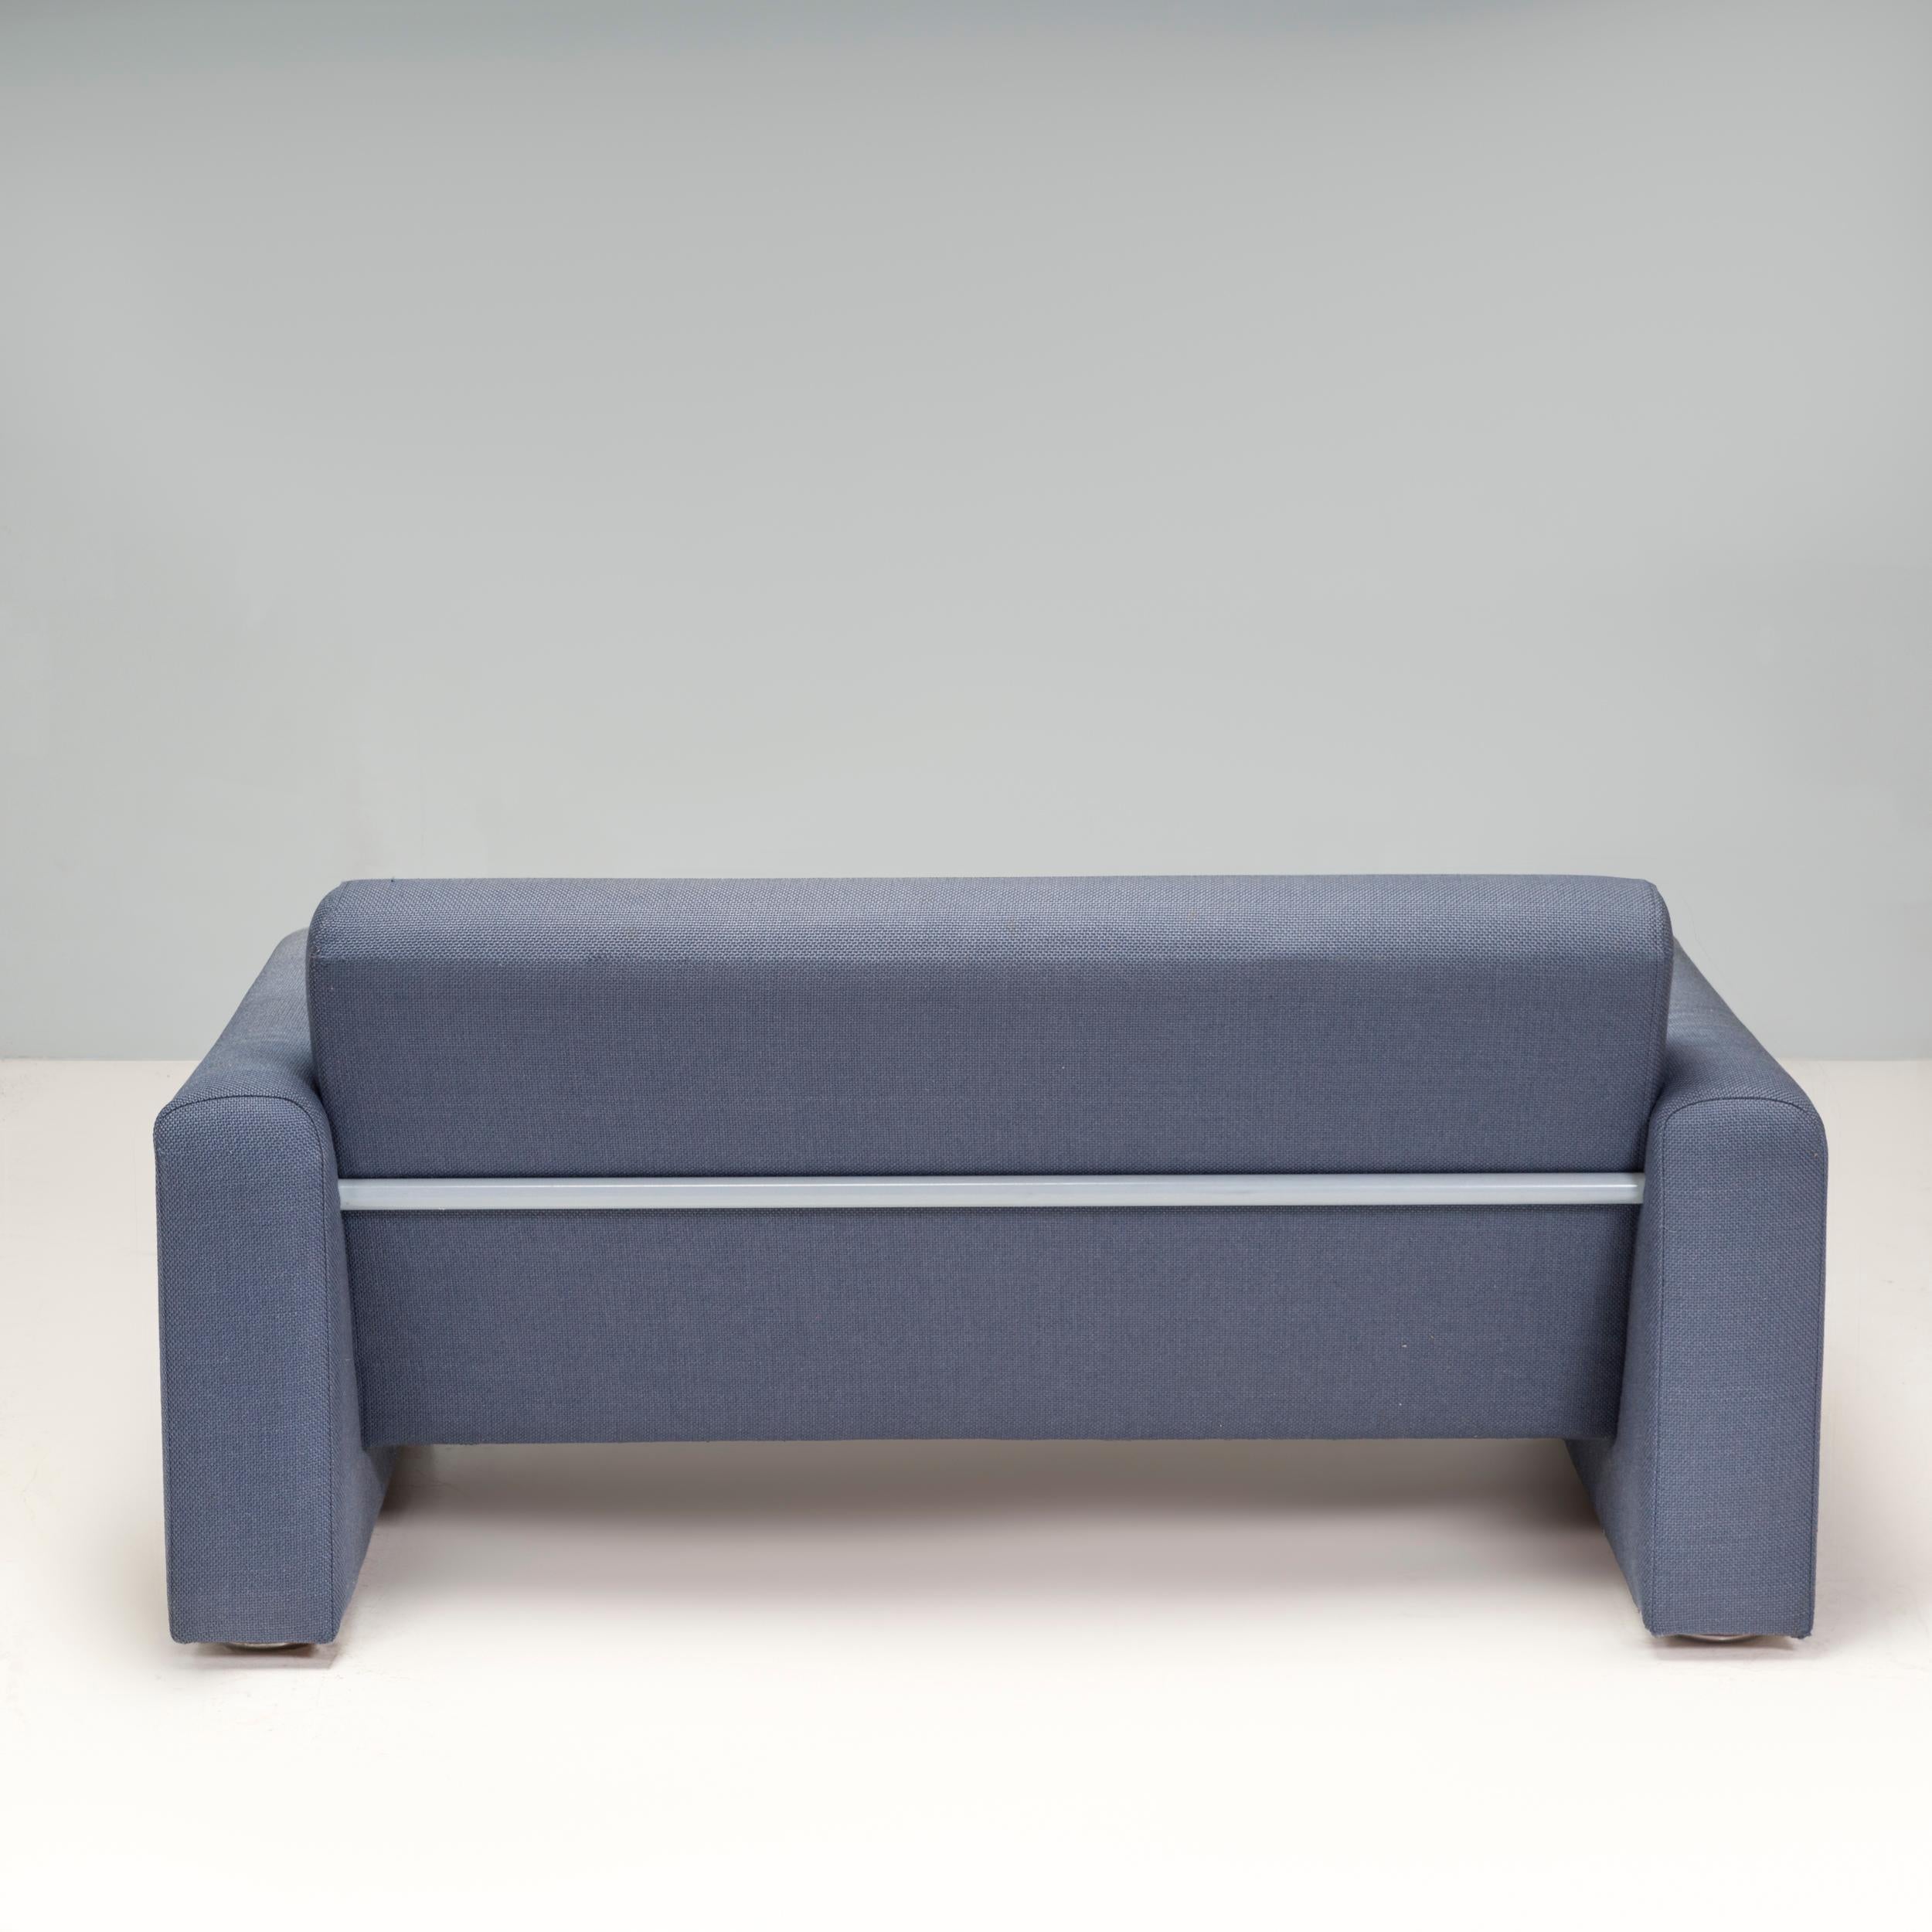 Late 20th Century Artifort 691 Blue Fabric Sofa, 1980s For Sale